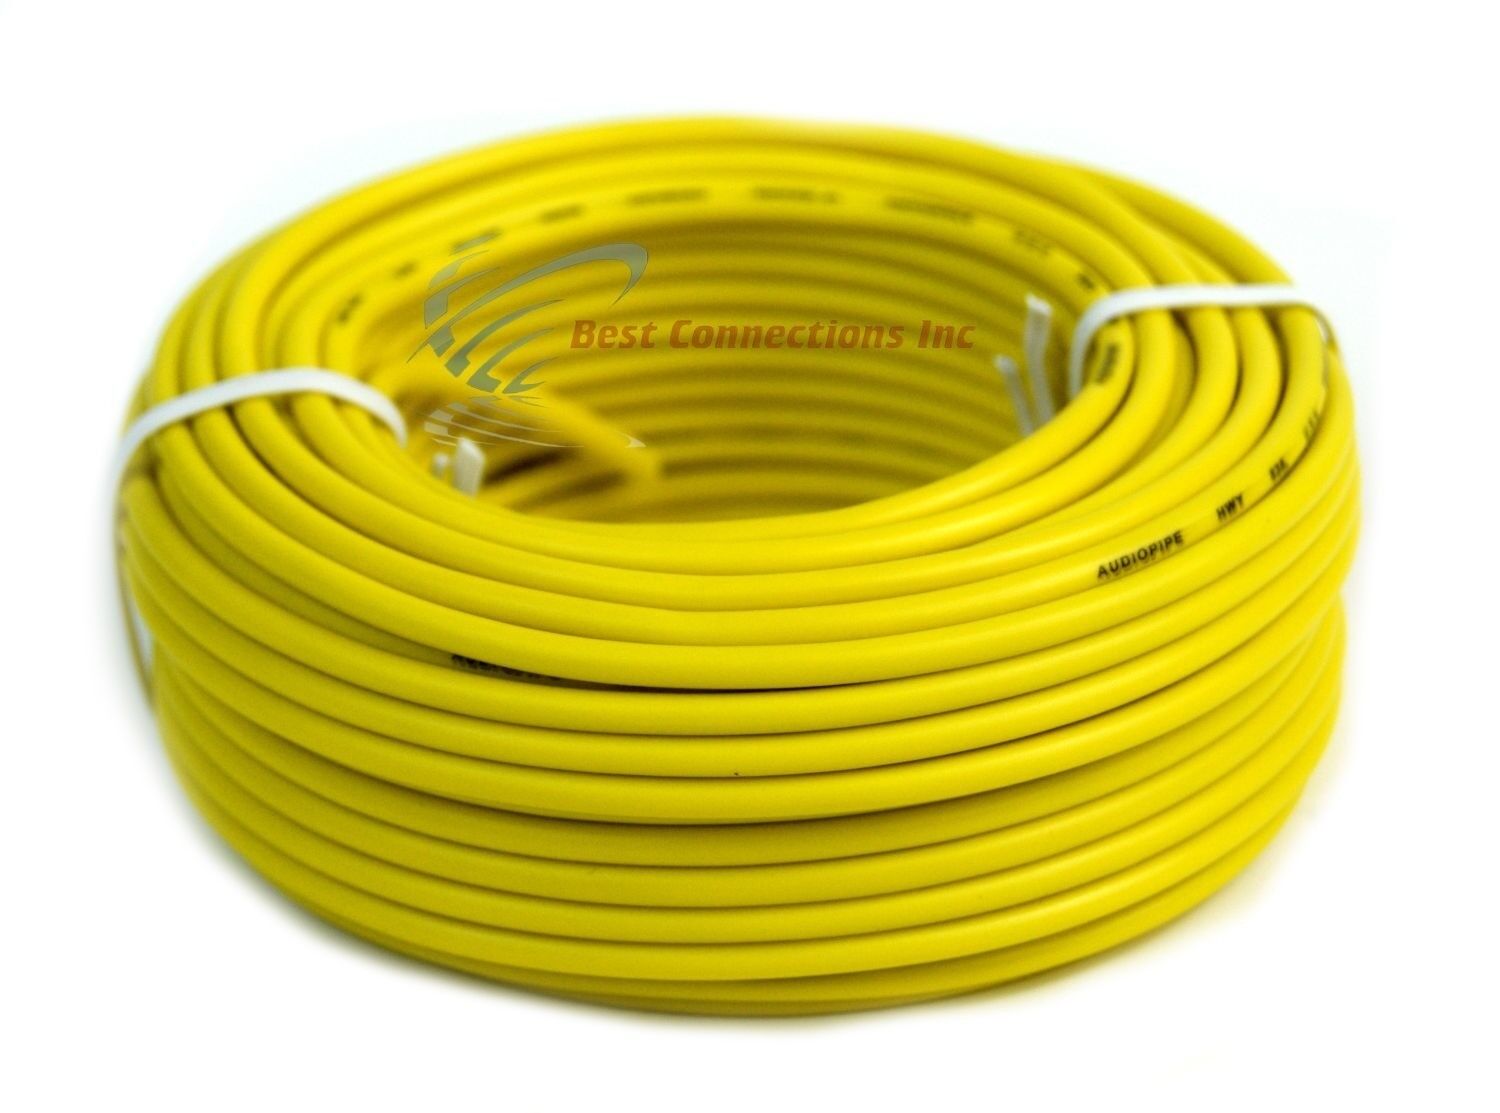 18 GA Gauge 50' Feet Yellow Audiopipe Car Audio Home Remote Primary Cable Wire - image 4 of 4